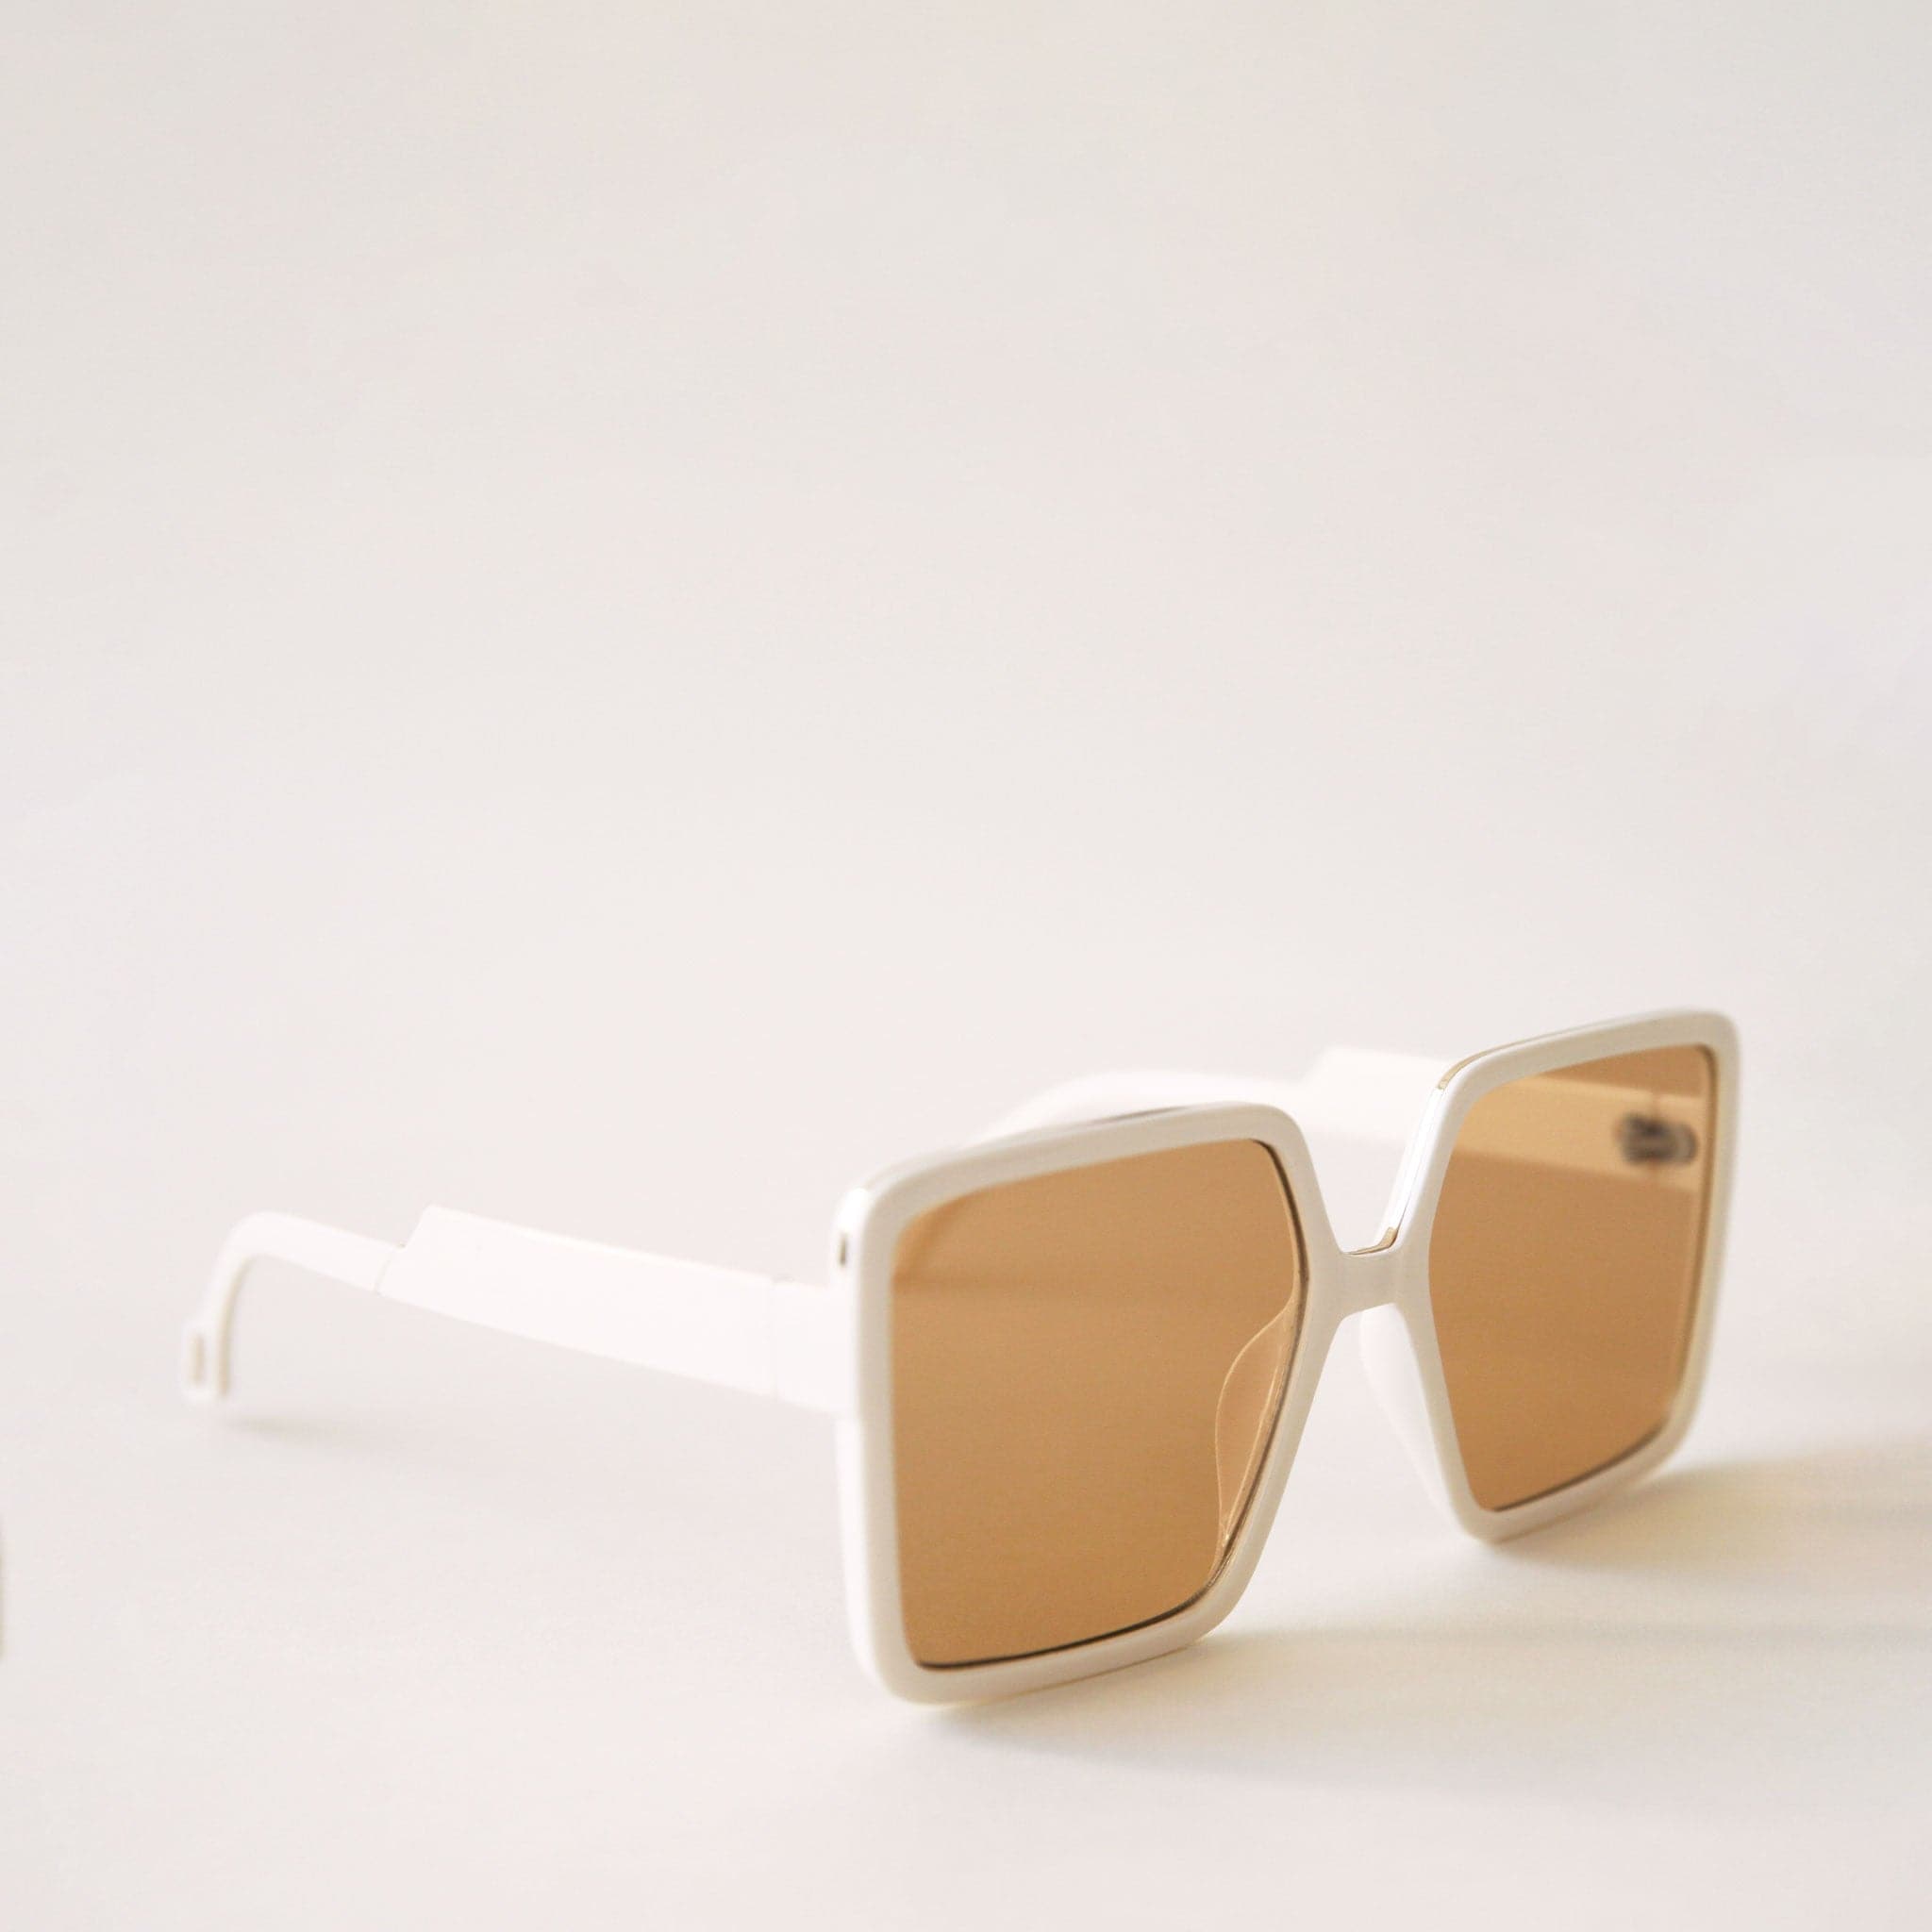 70&#39;s inspired square sunglasses with an oversized white frame and amber colored lenses.